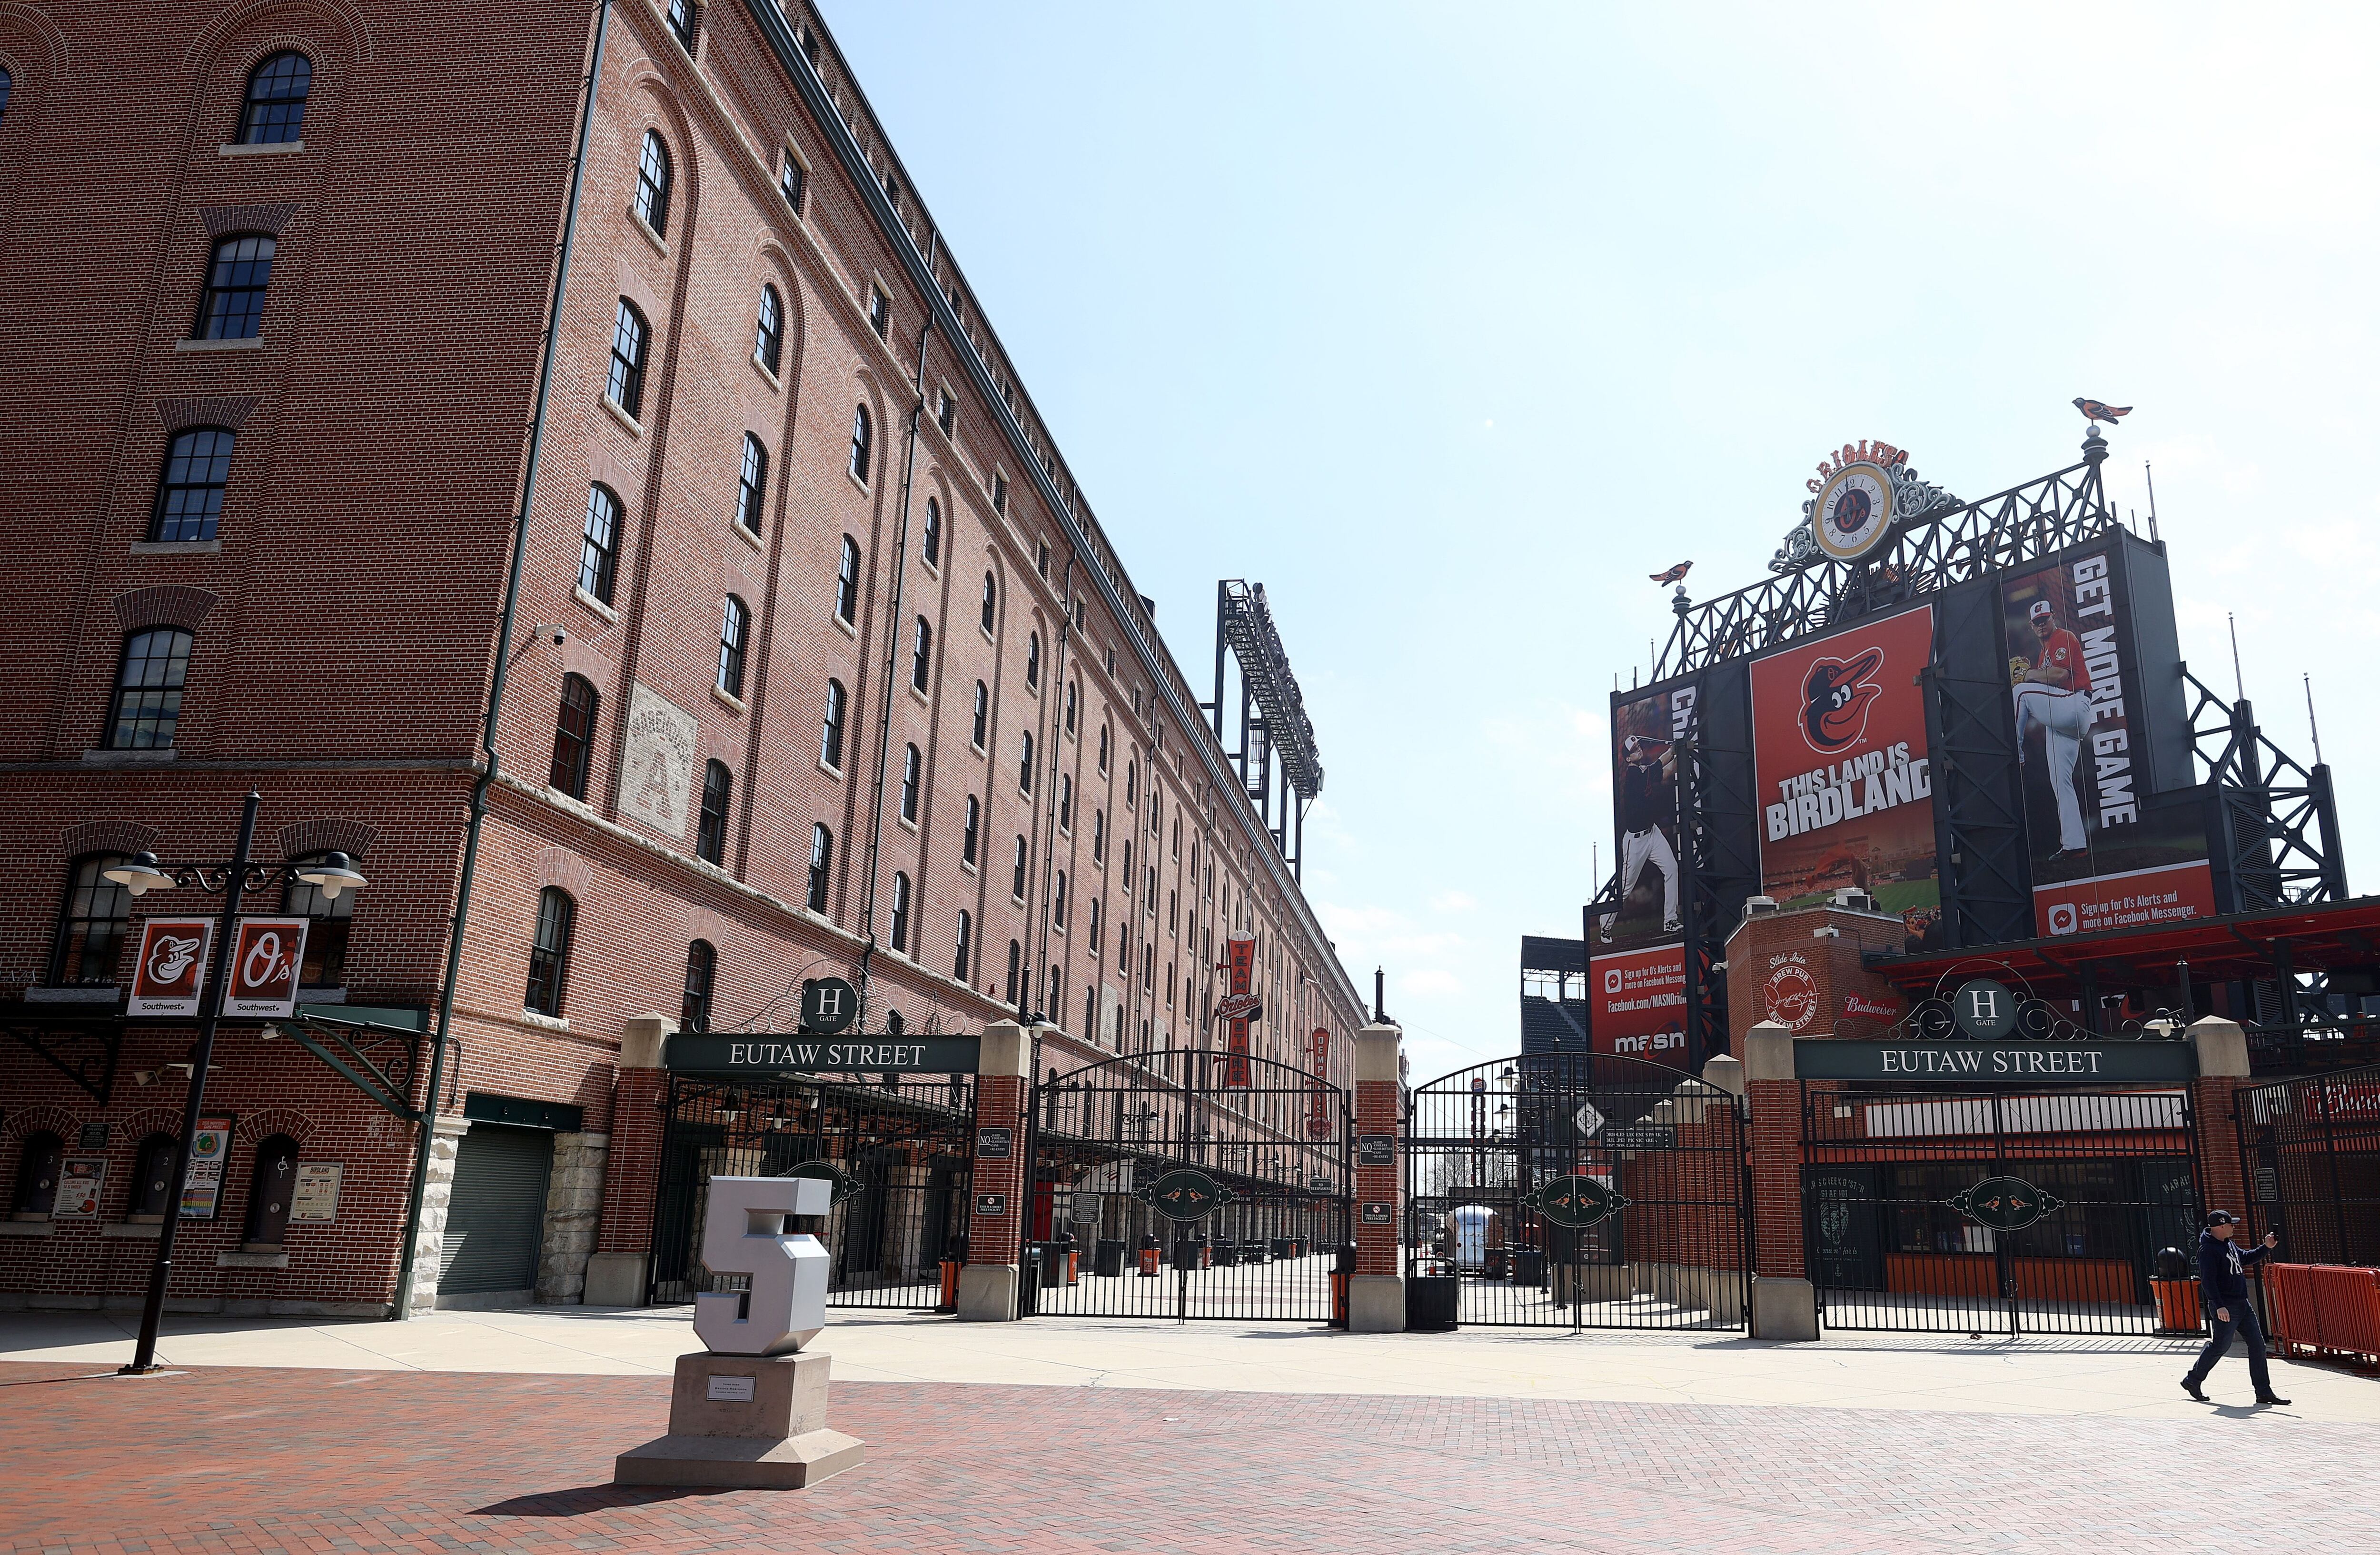 Oriole Park at Camden Yards upper deck bought out by Autumn Lake